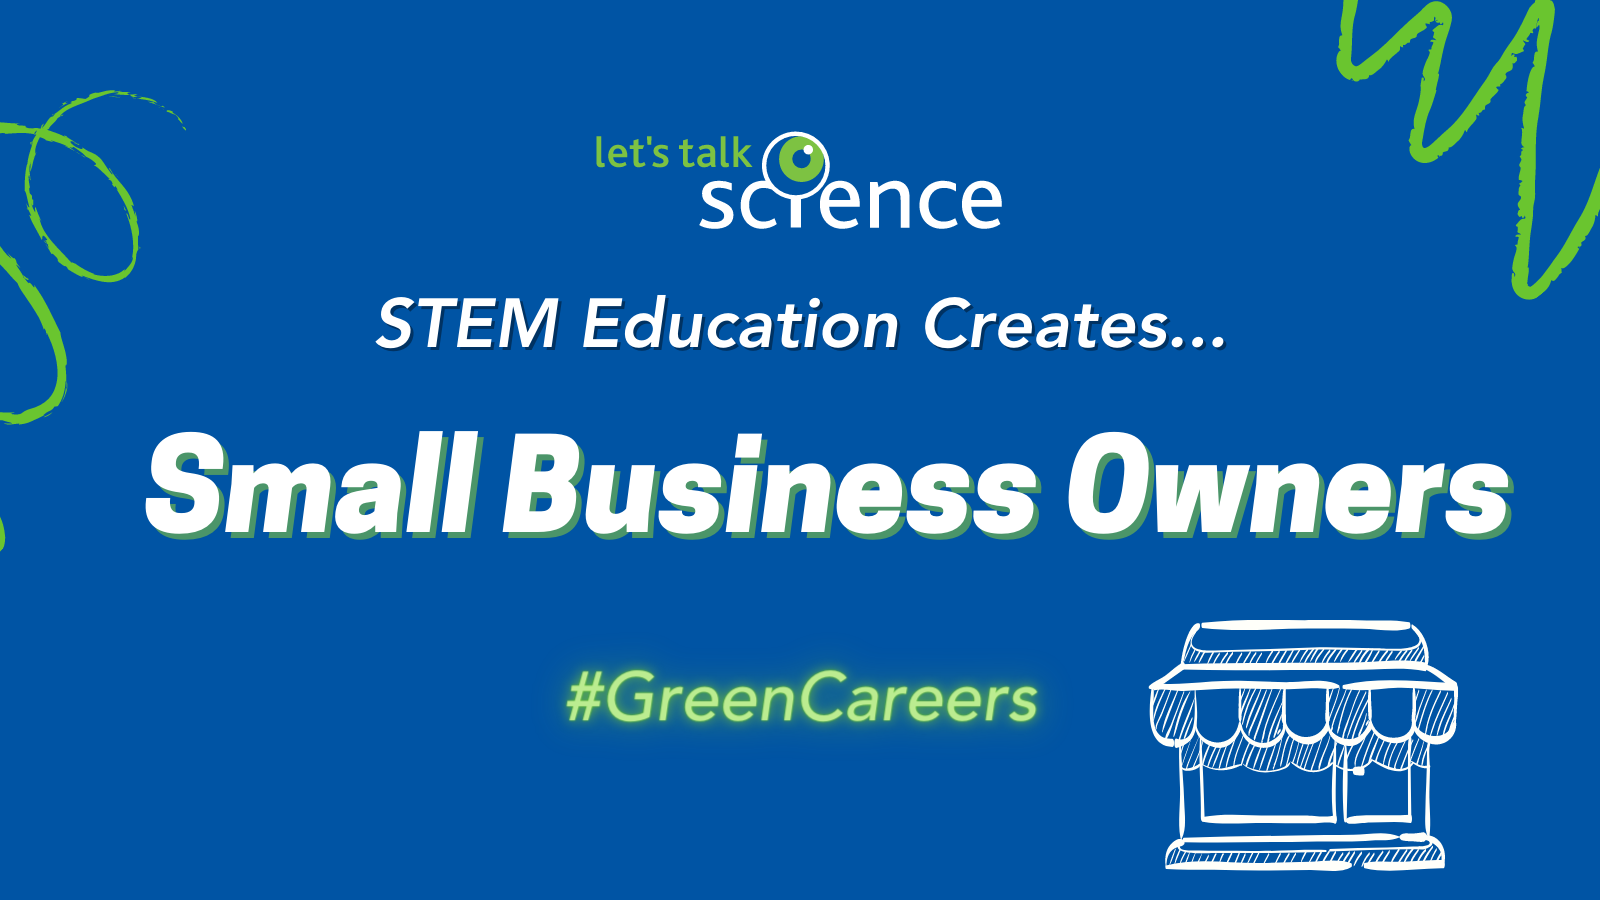 STEM Education Creates... Small Business Owners #GreenCareers